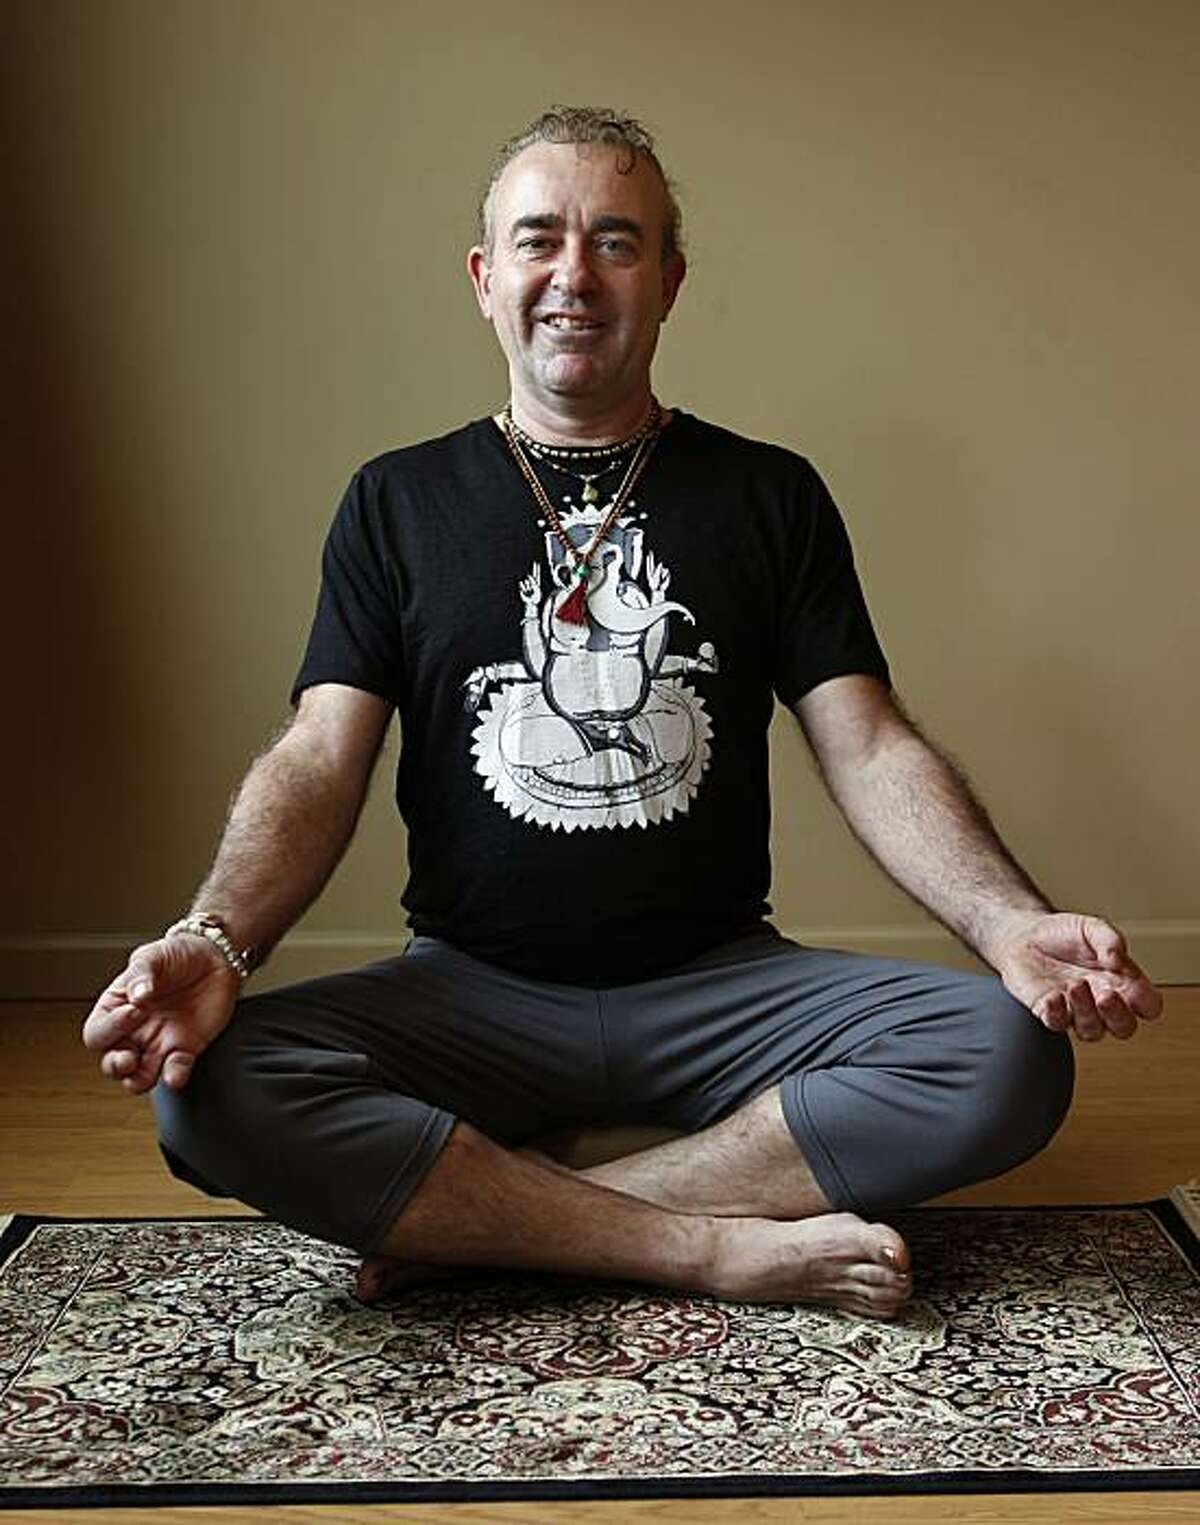 Tim Dale, founder of the Yoga Tree studio, strikes a yoga pose in San Francisco, Calif., on Friday, Dec. 10, 2010.